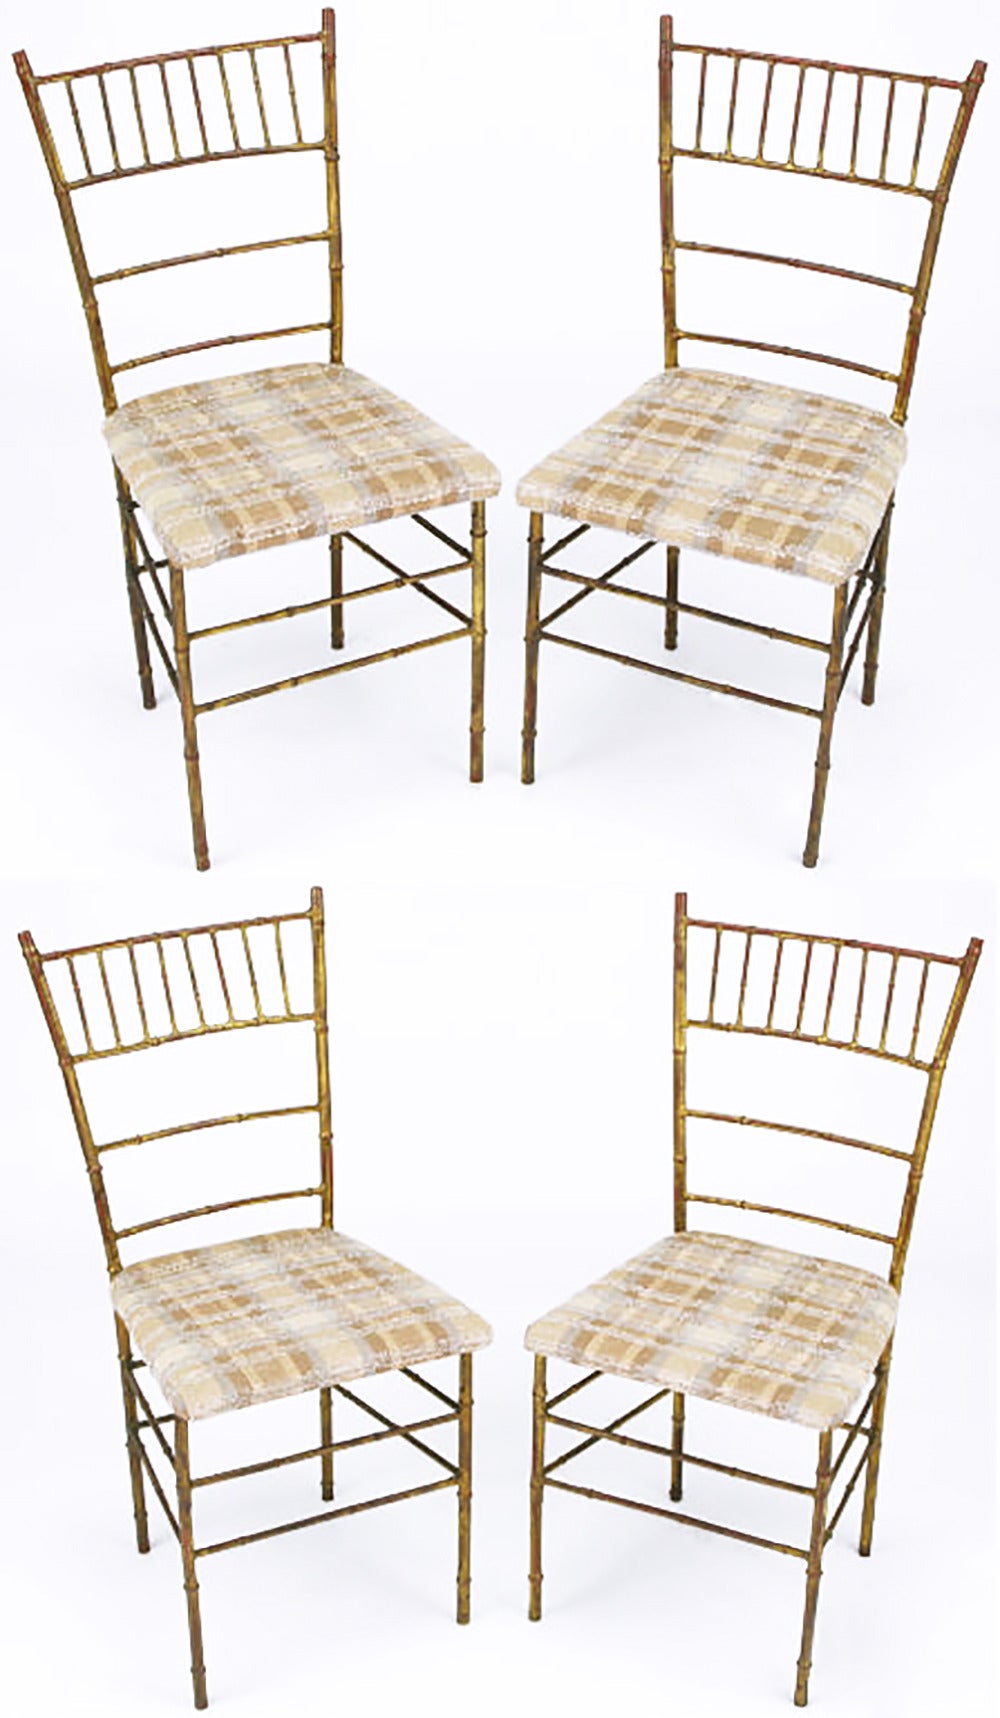 Set of four Chiavari style distressed gilt metal dining chairs in stylized bamboo with upholstered seats. Seat covered with cross hatch textured cotton in tan, brown and light blue.